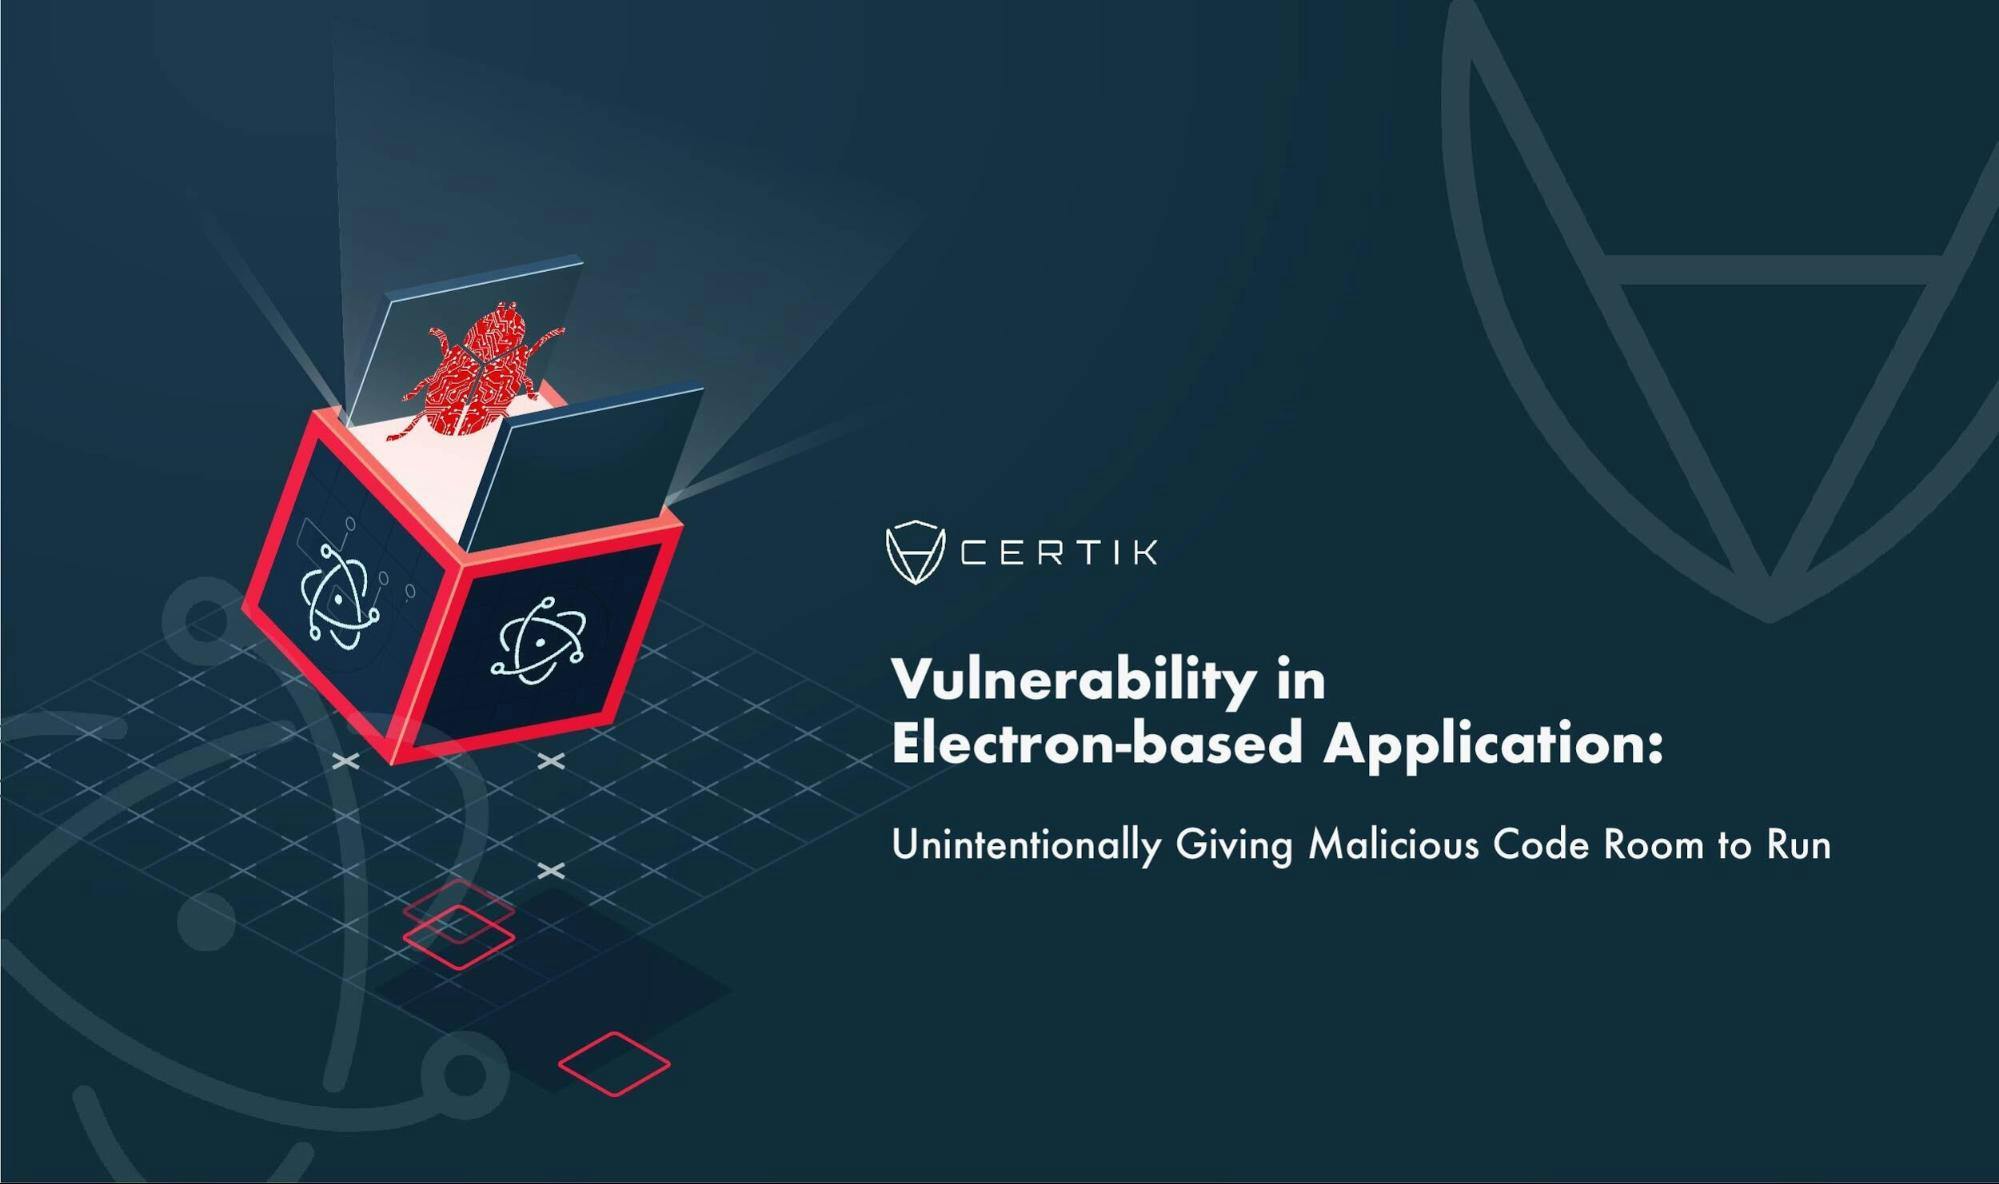 Vulnerability in Electron-based Application: Unintentionally Giving Malicious Code Room to Run